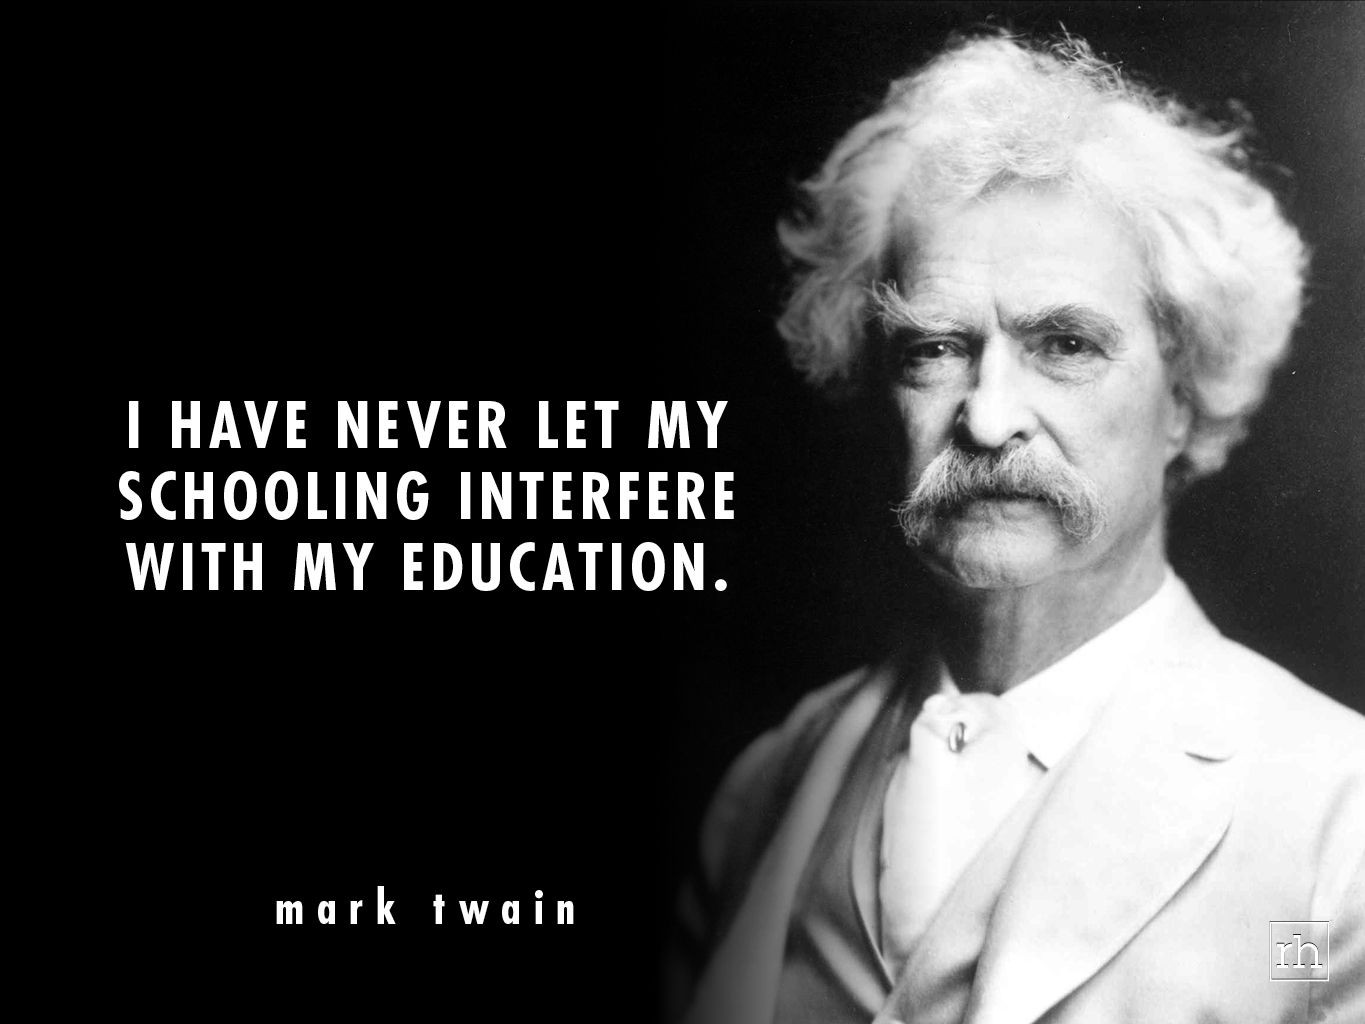 Mark Twain Education Quote
 "I have never let my schooling interfere with my education